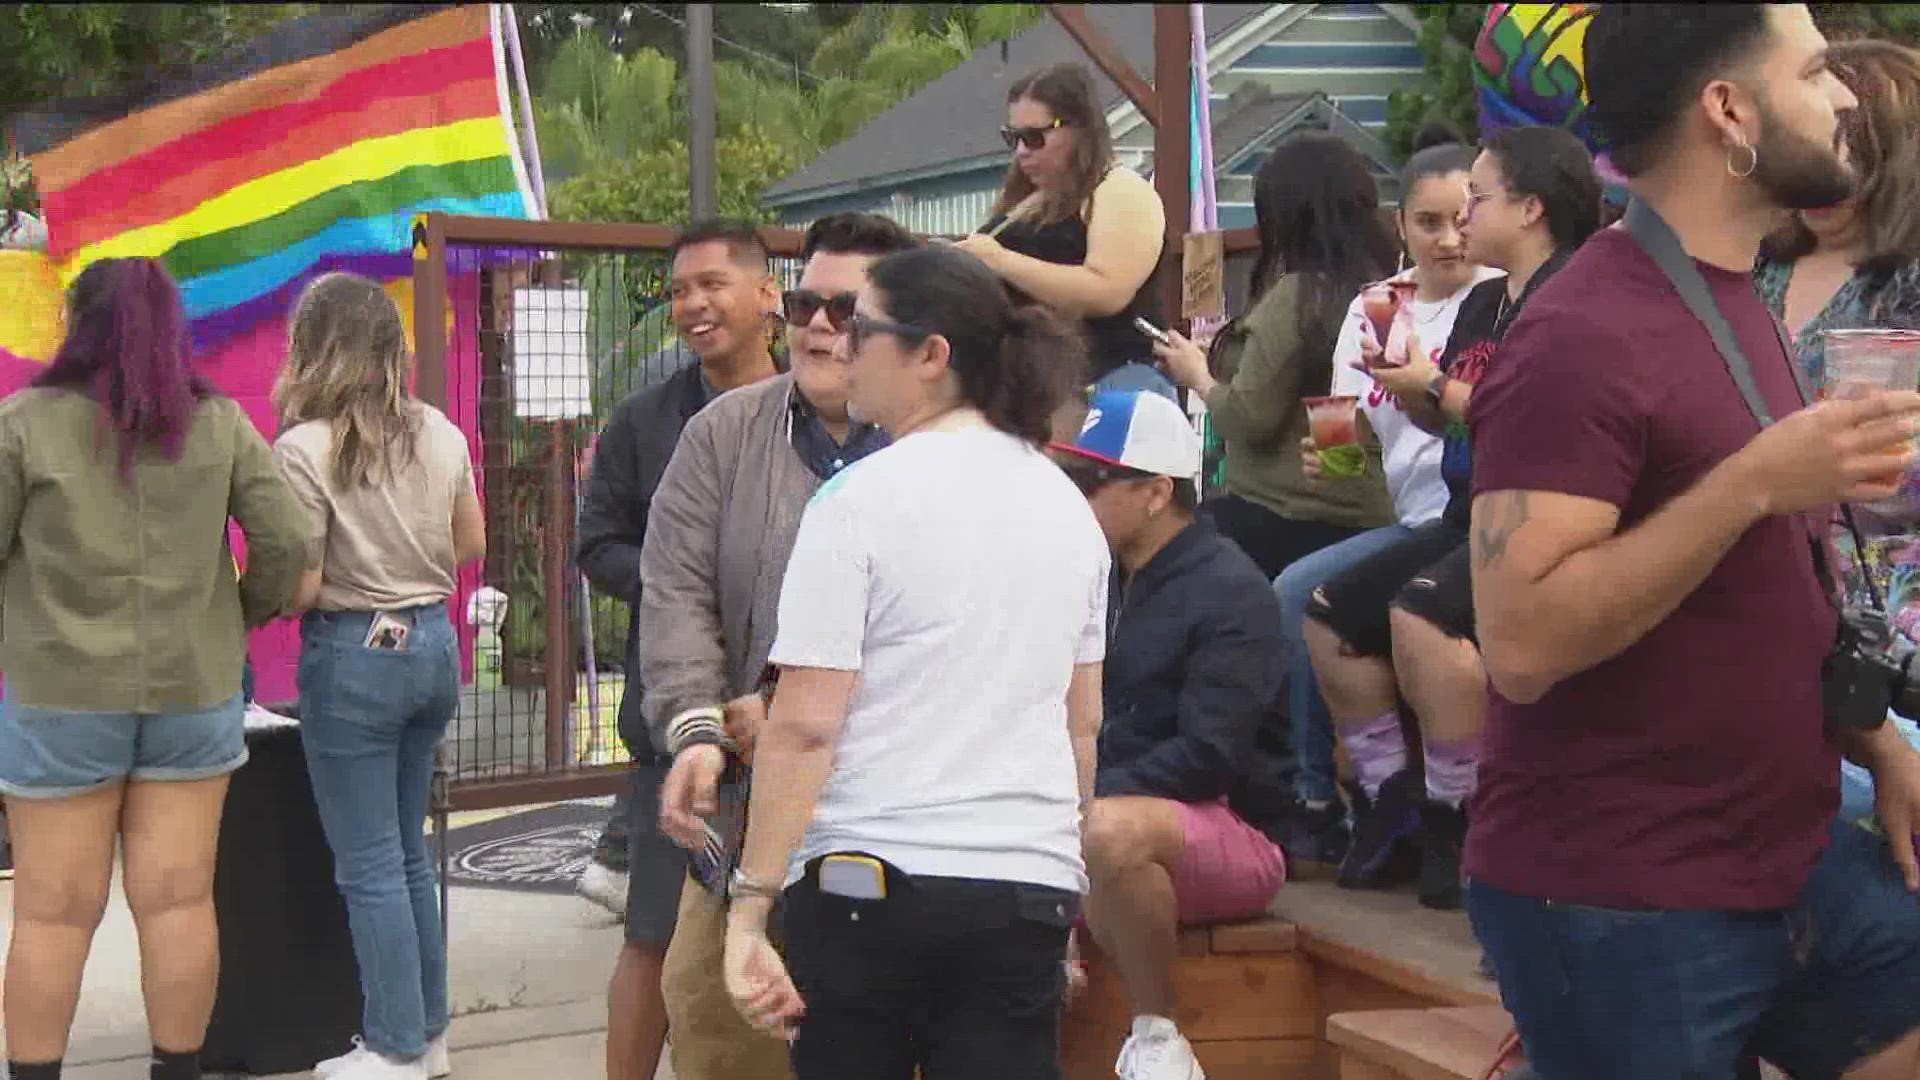 As LGBTQ+ Pride begins around the world, this weekend it’s a celebration of the LGBTQ+ community in Hillcrest and in Barrio Logan.